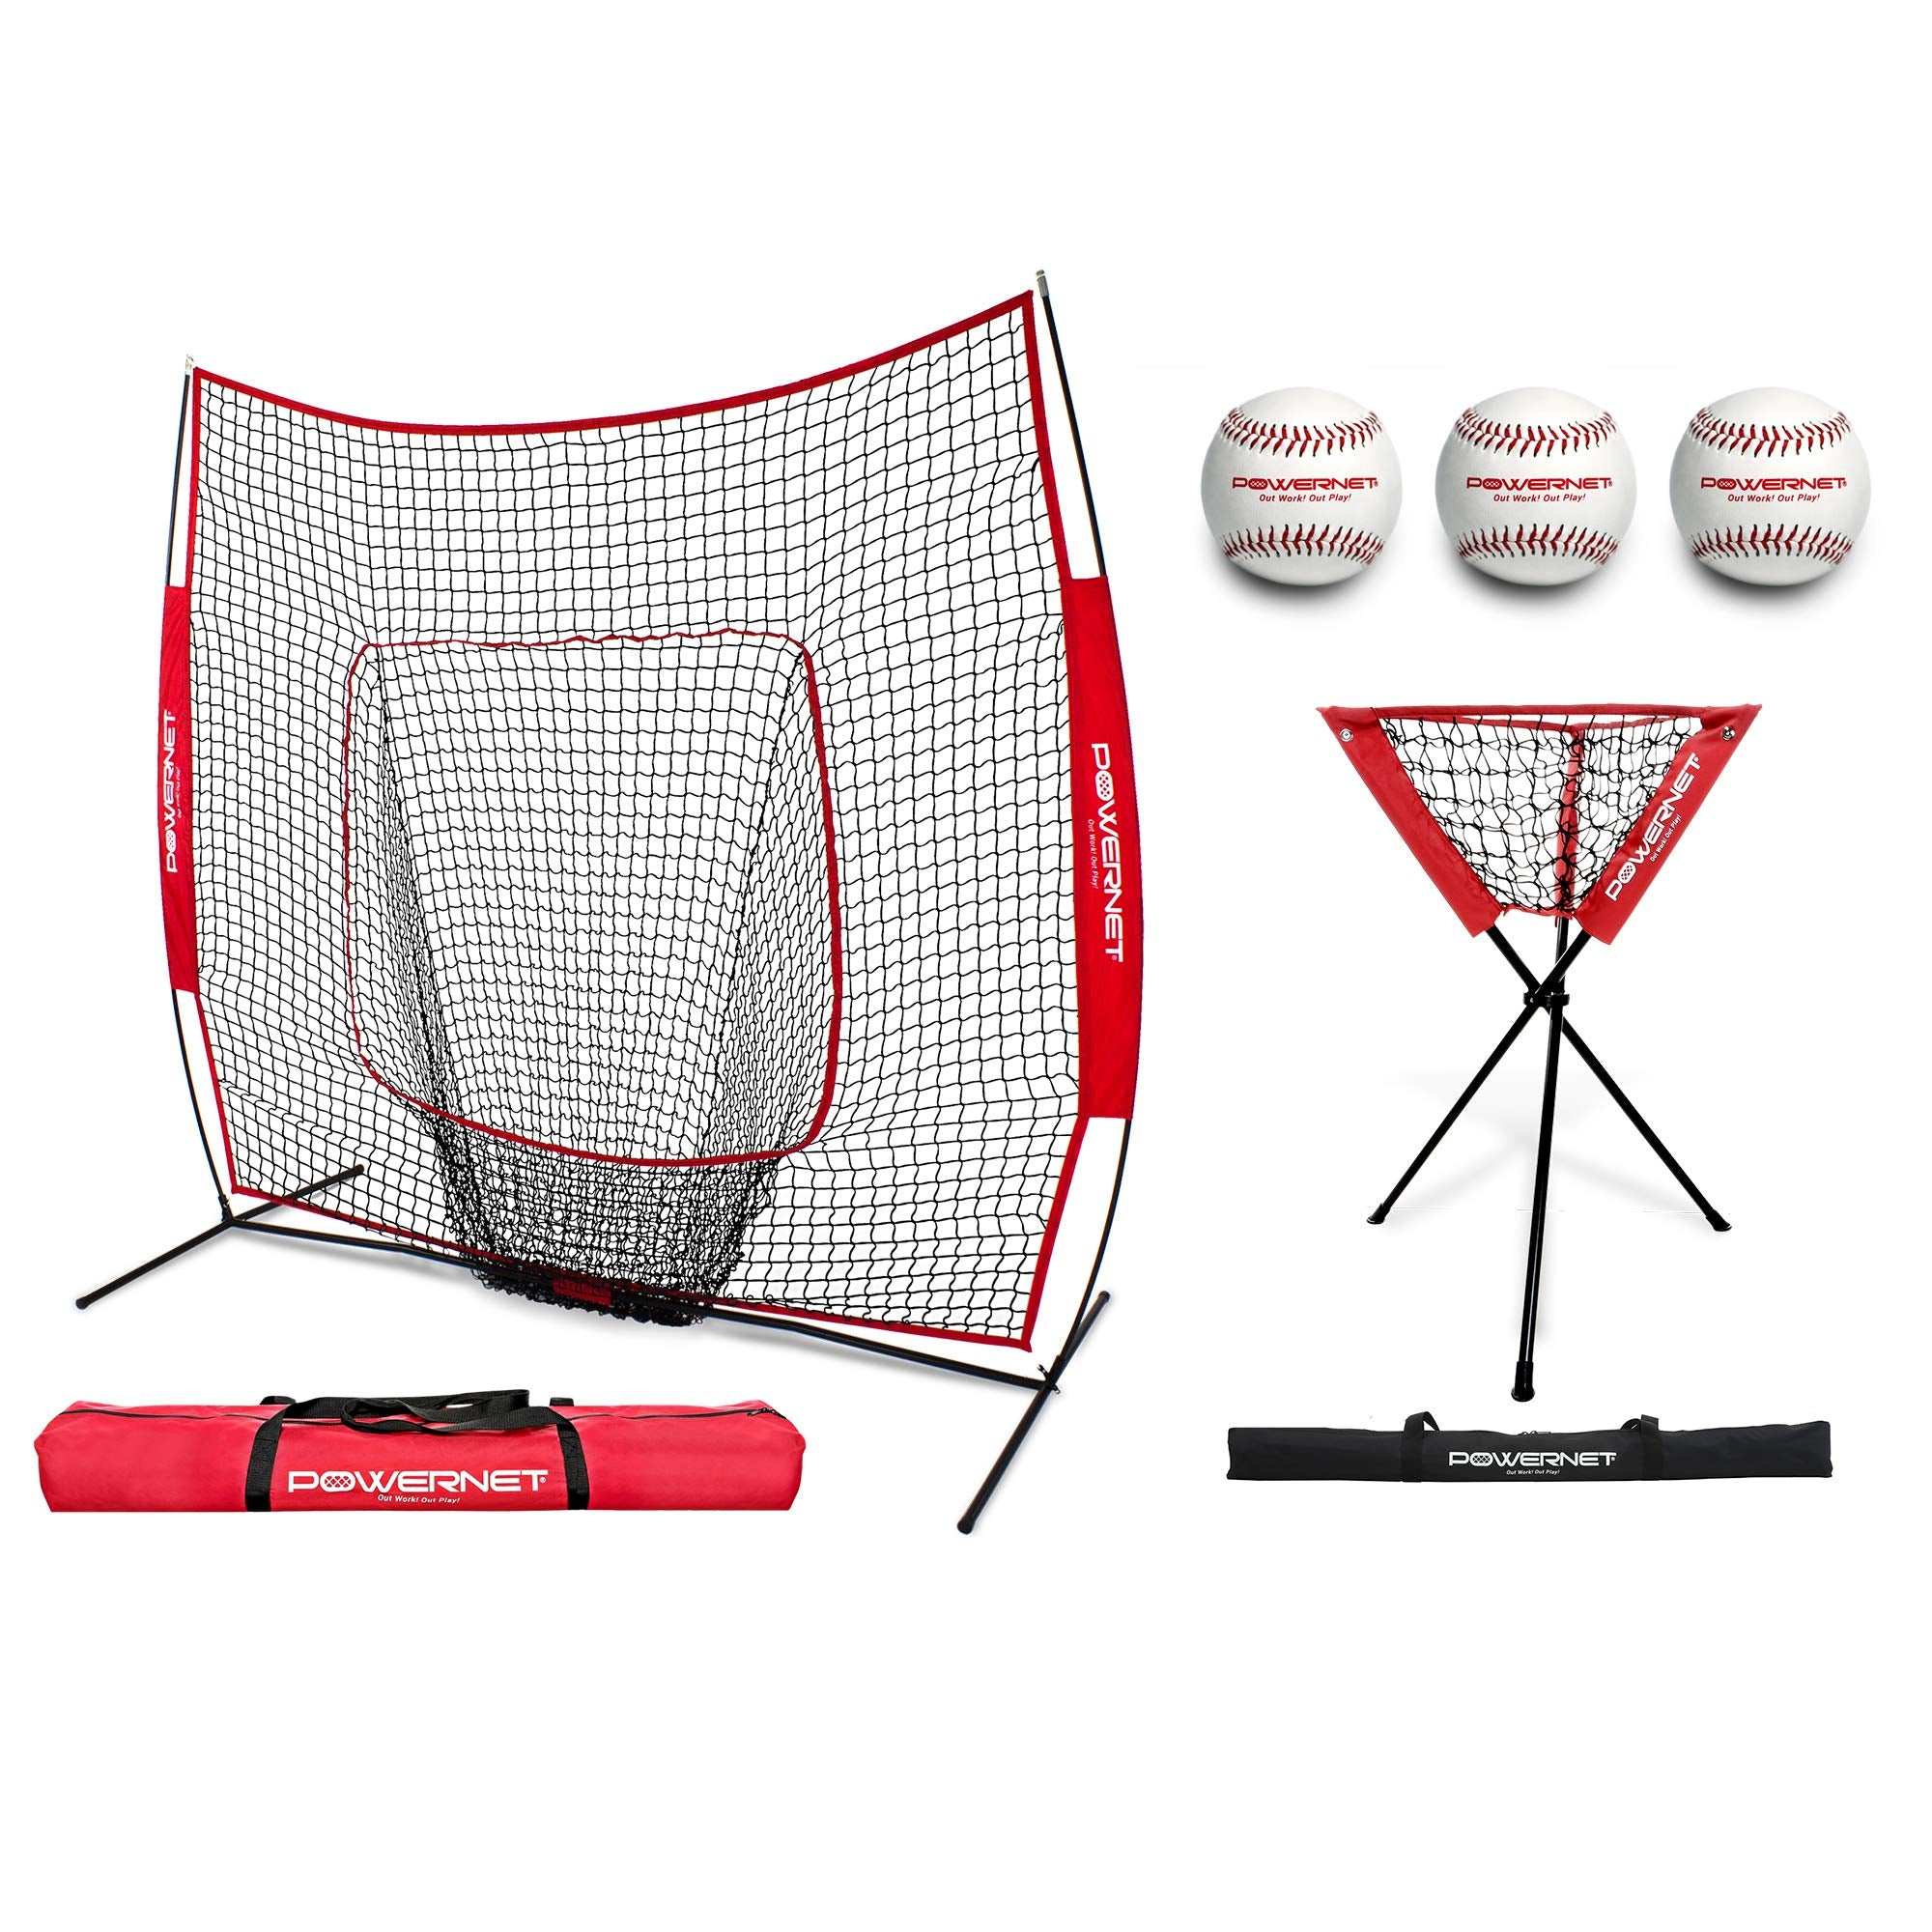 Use During Training and Drills Practice Hitting Fielding Ball Caddy Save Your Back Pitching PowerNet Baseball Softball Practice Net 7x7 3 PK Practice Baseballs Bundle Batting 